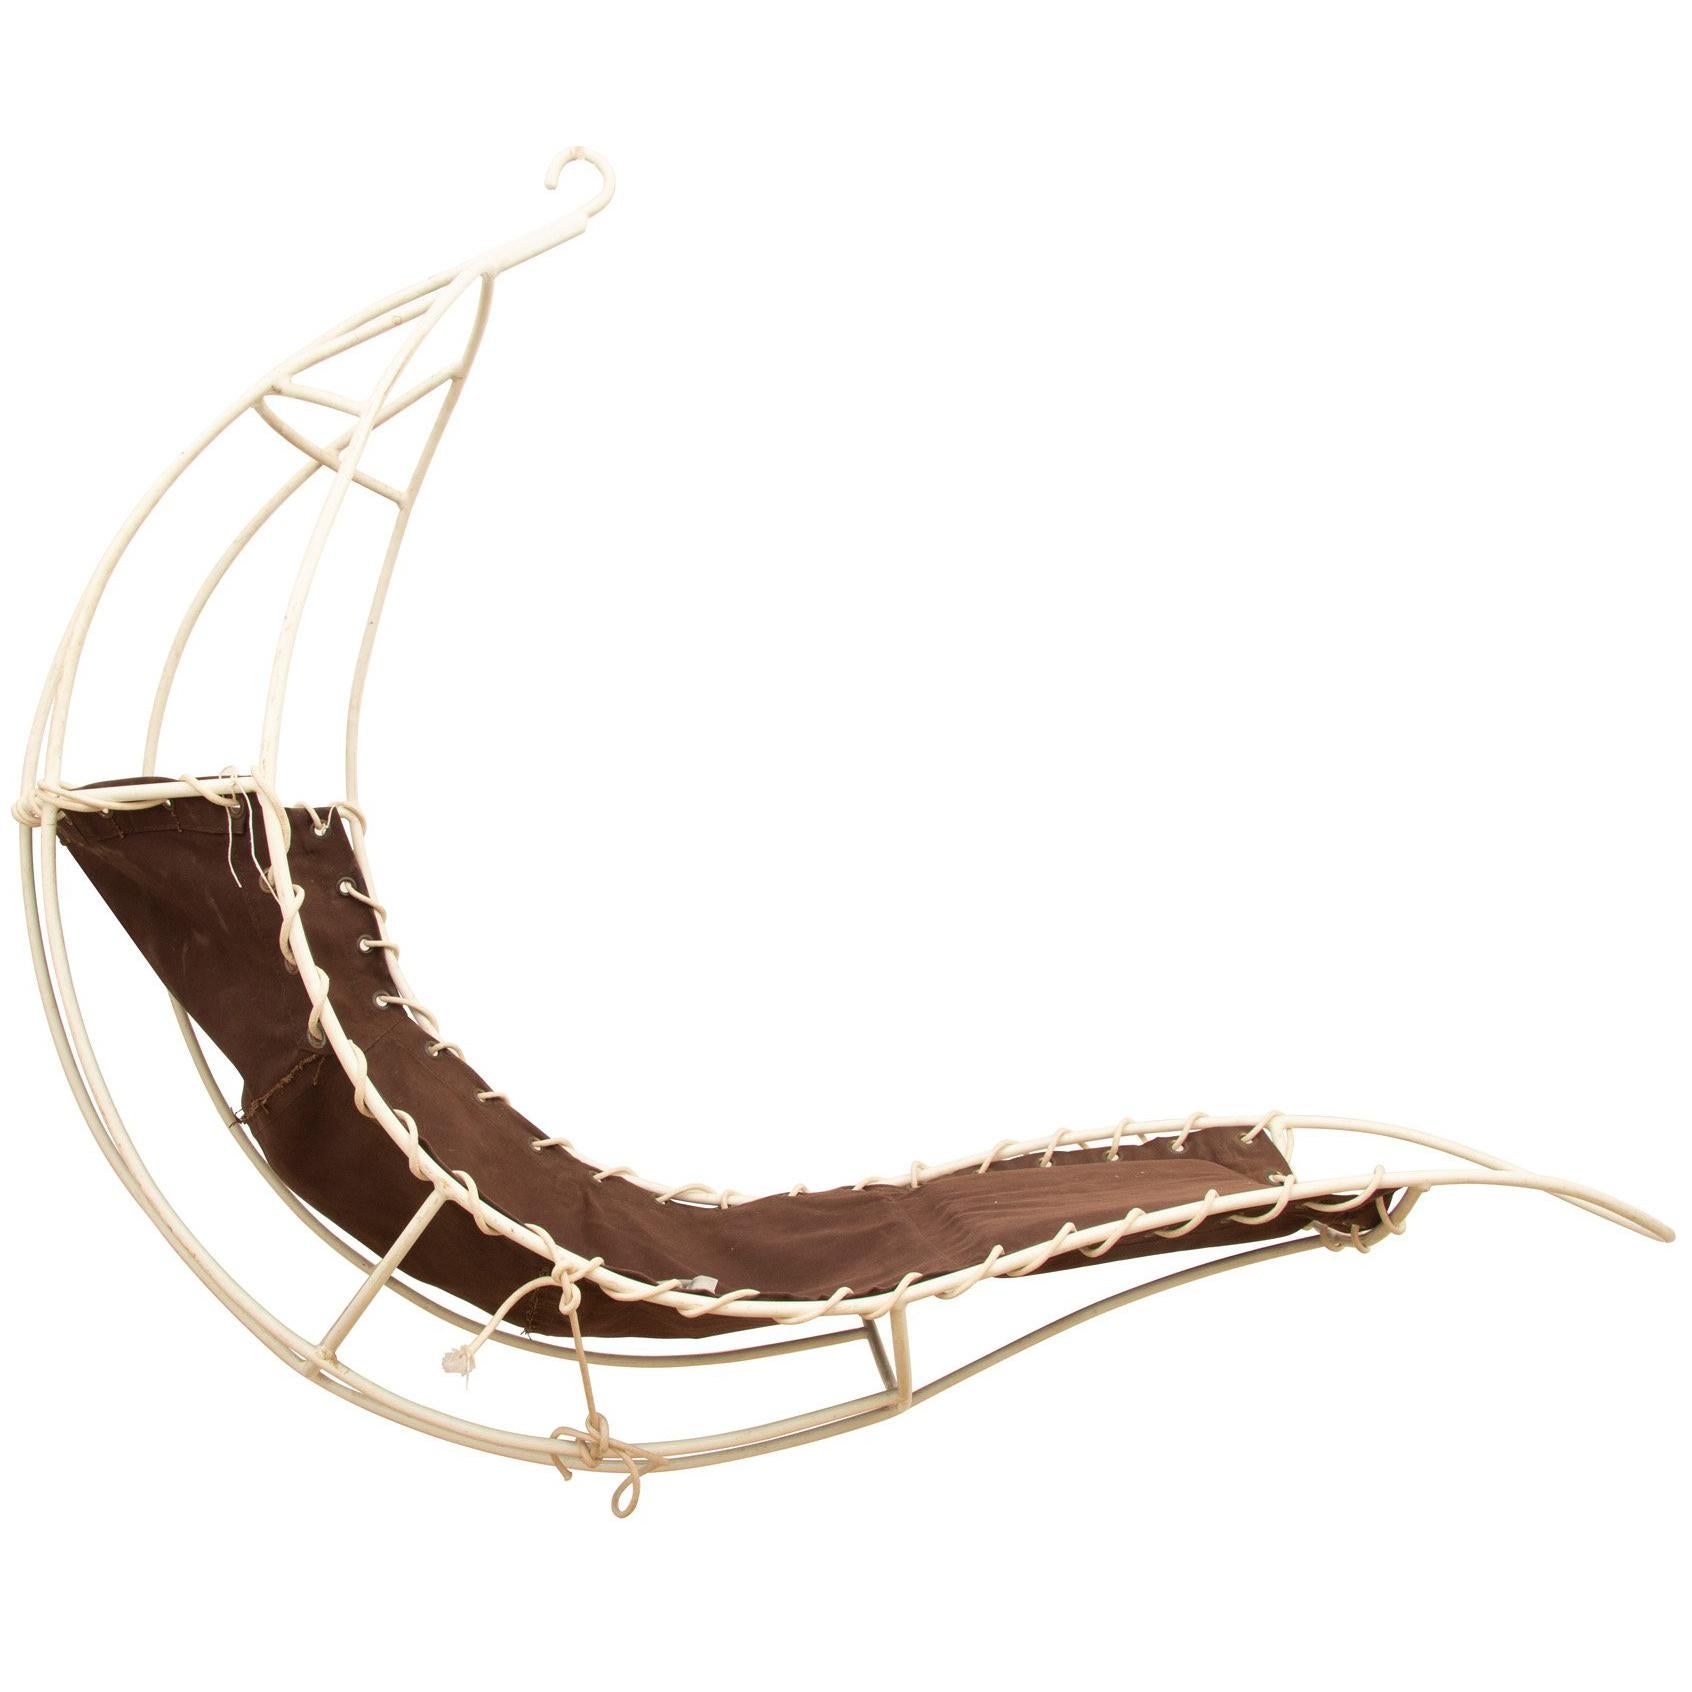 Midcentury Hanging Leaf Chair by Rupert Oliver For Sale